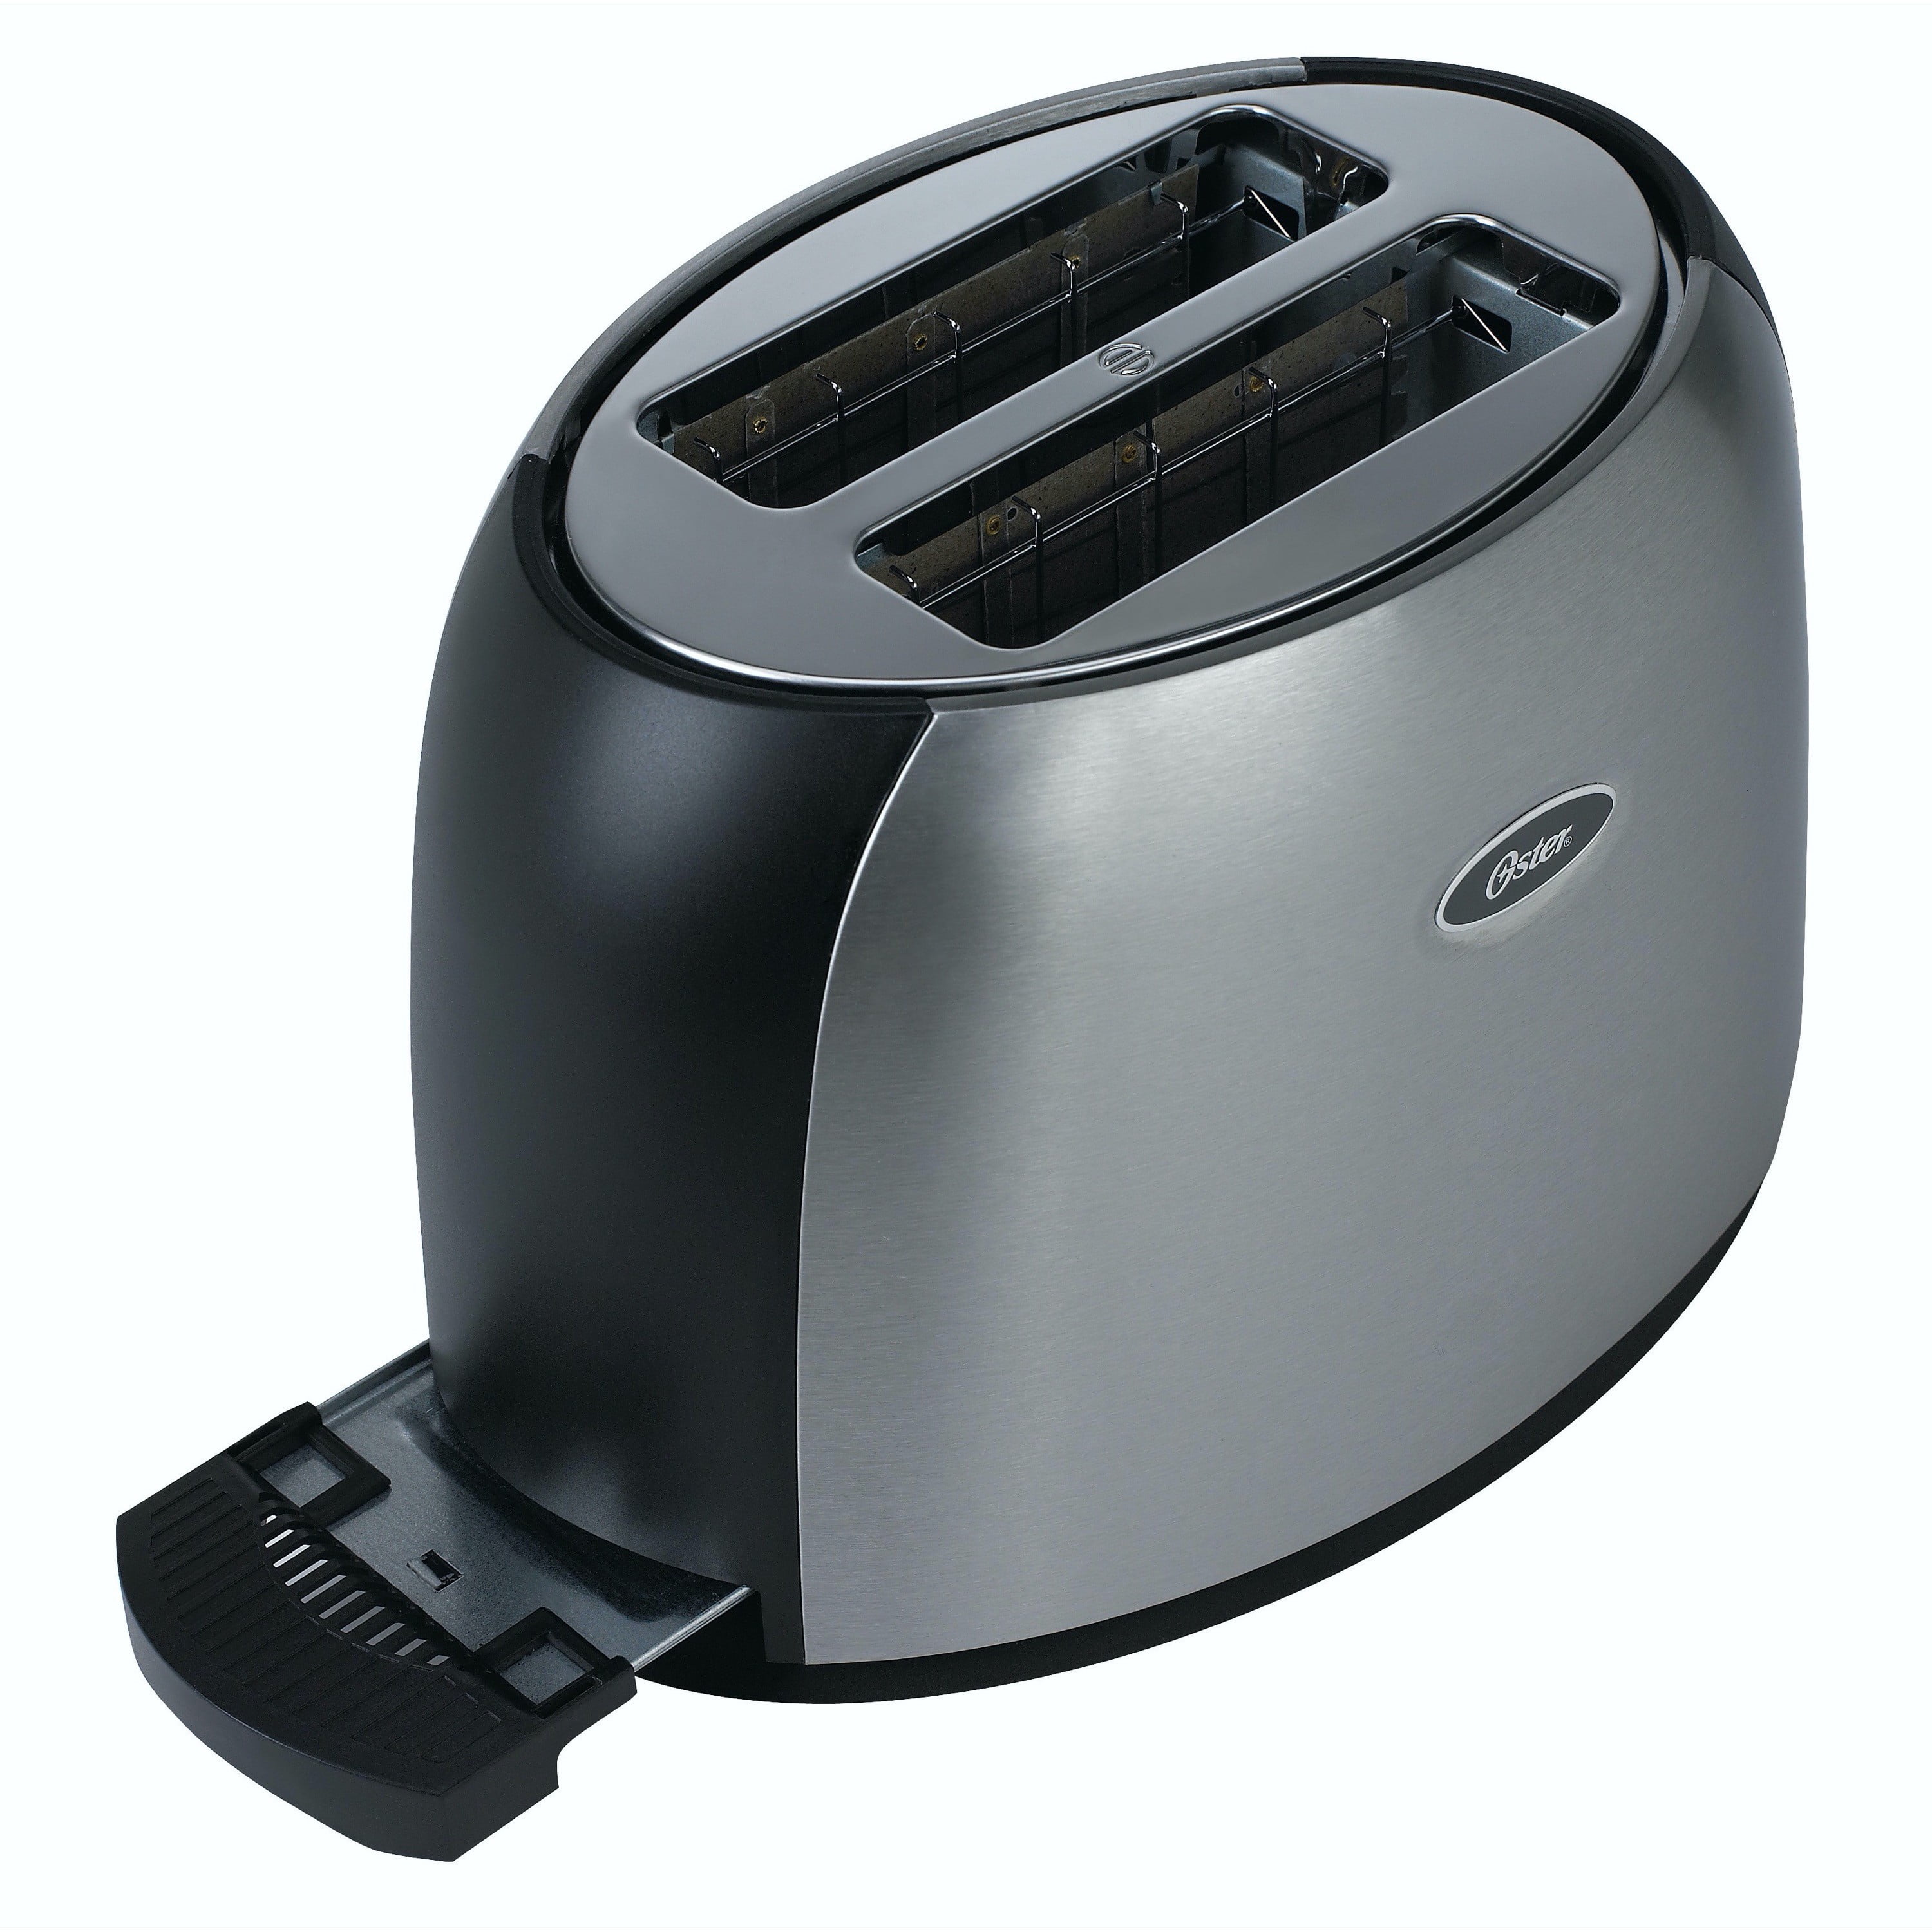 Oster 2-Slice Toaster with Extra-Wide Slots, Black – R & B Import